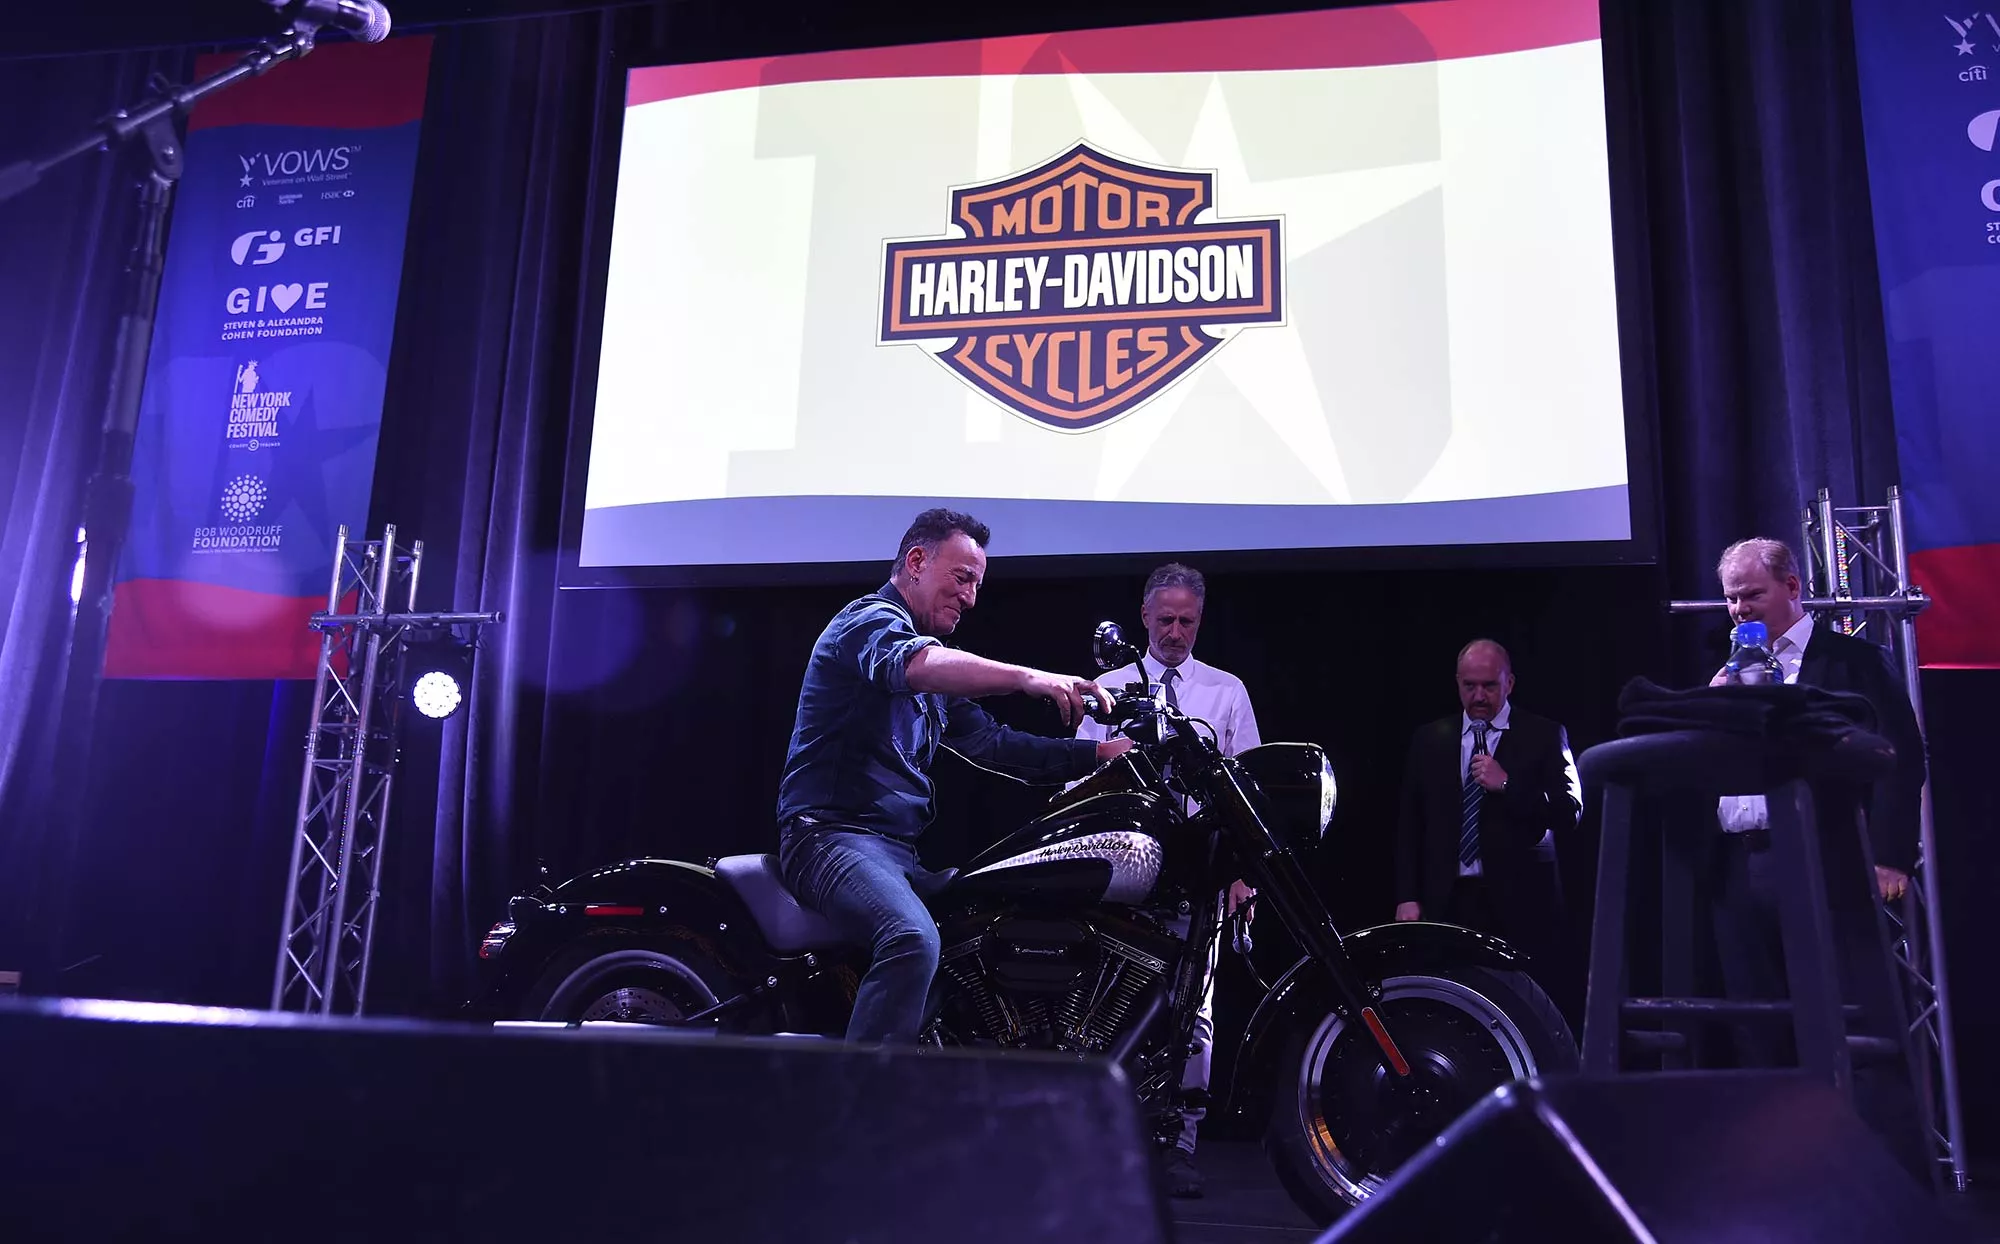 Springstein rode a Harley on stage at the Stand Up For Heroes benefit in 2016.